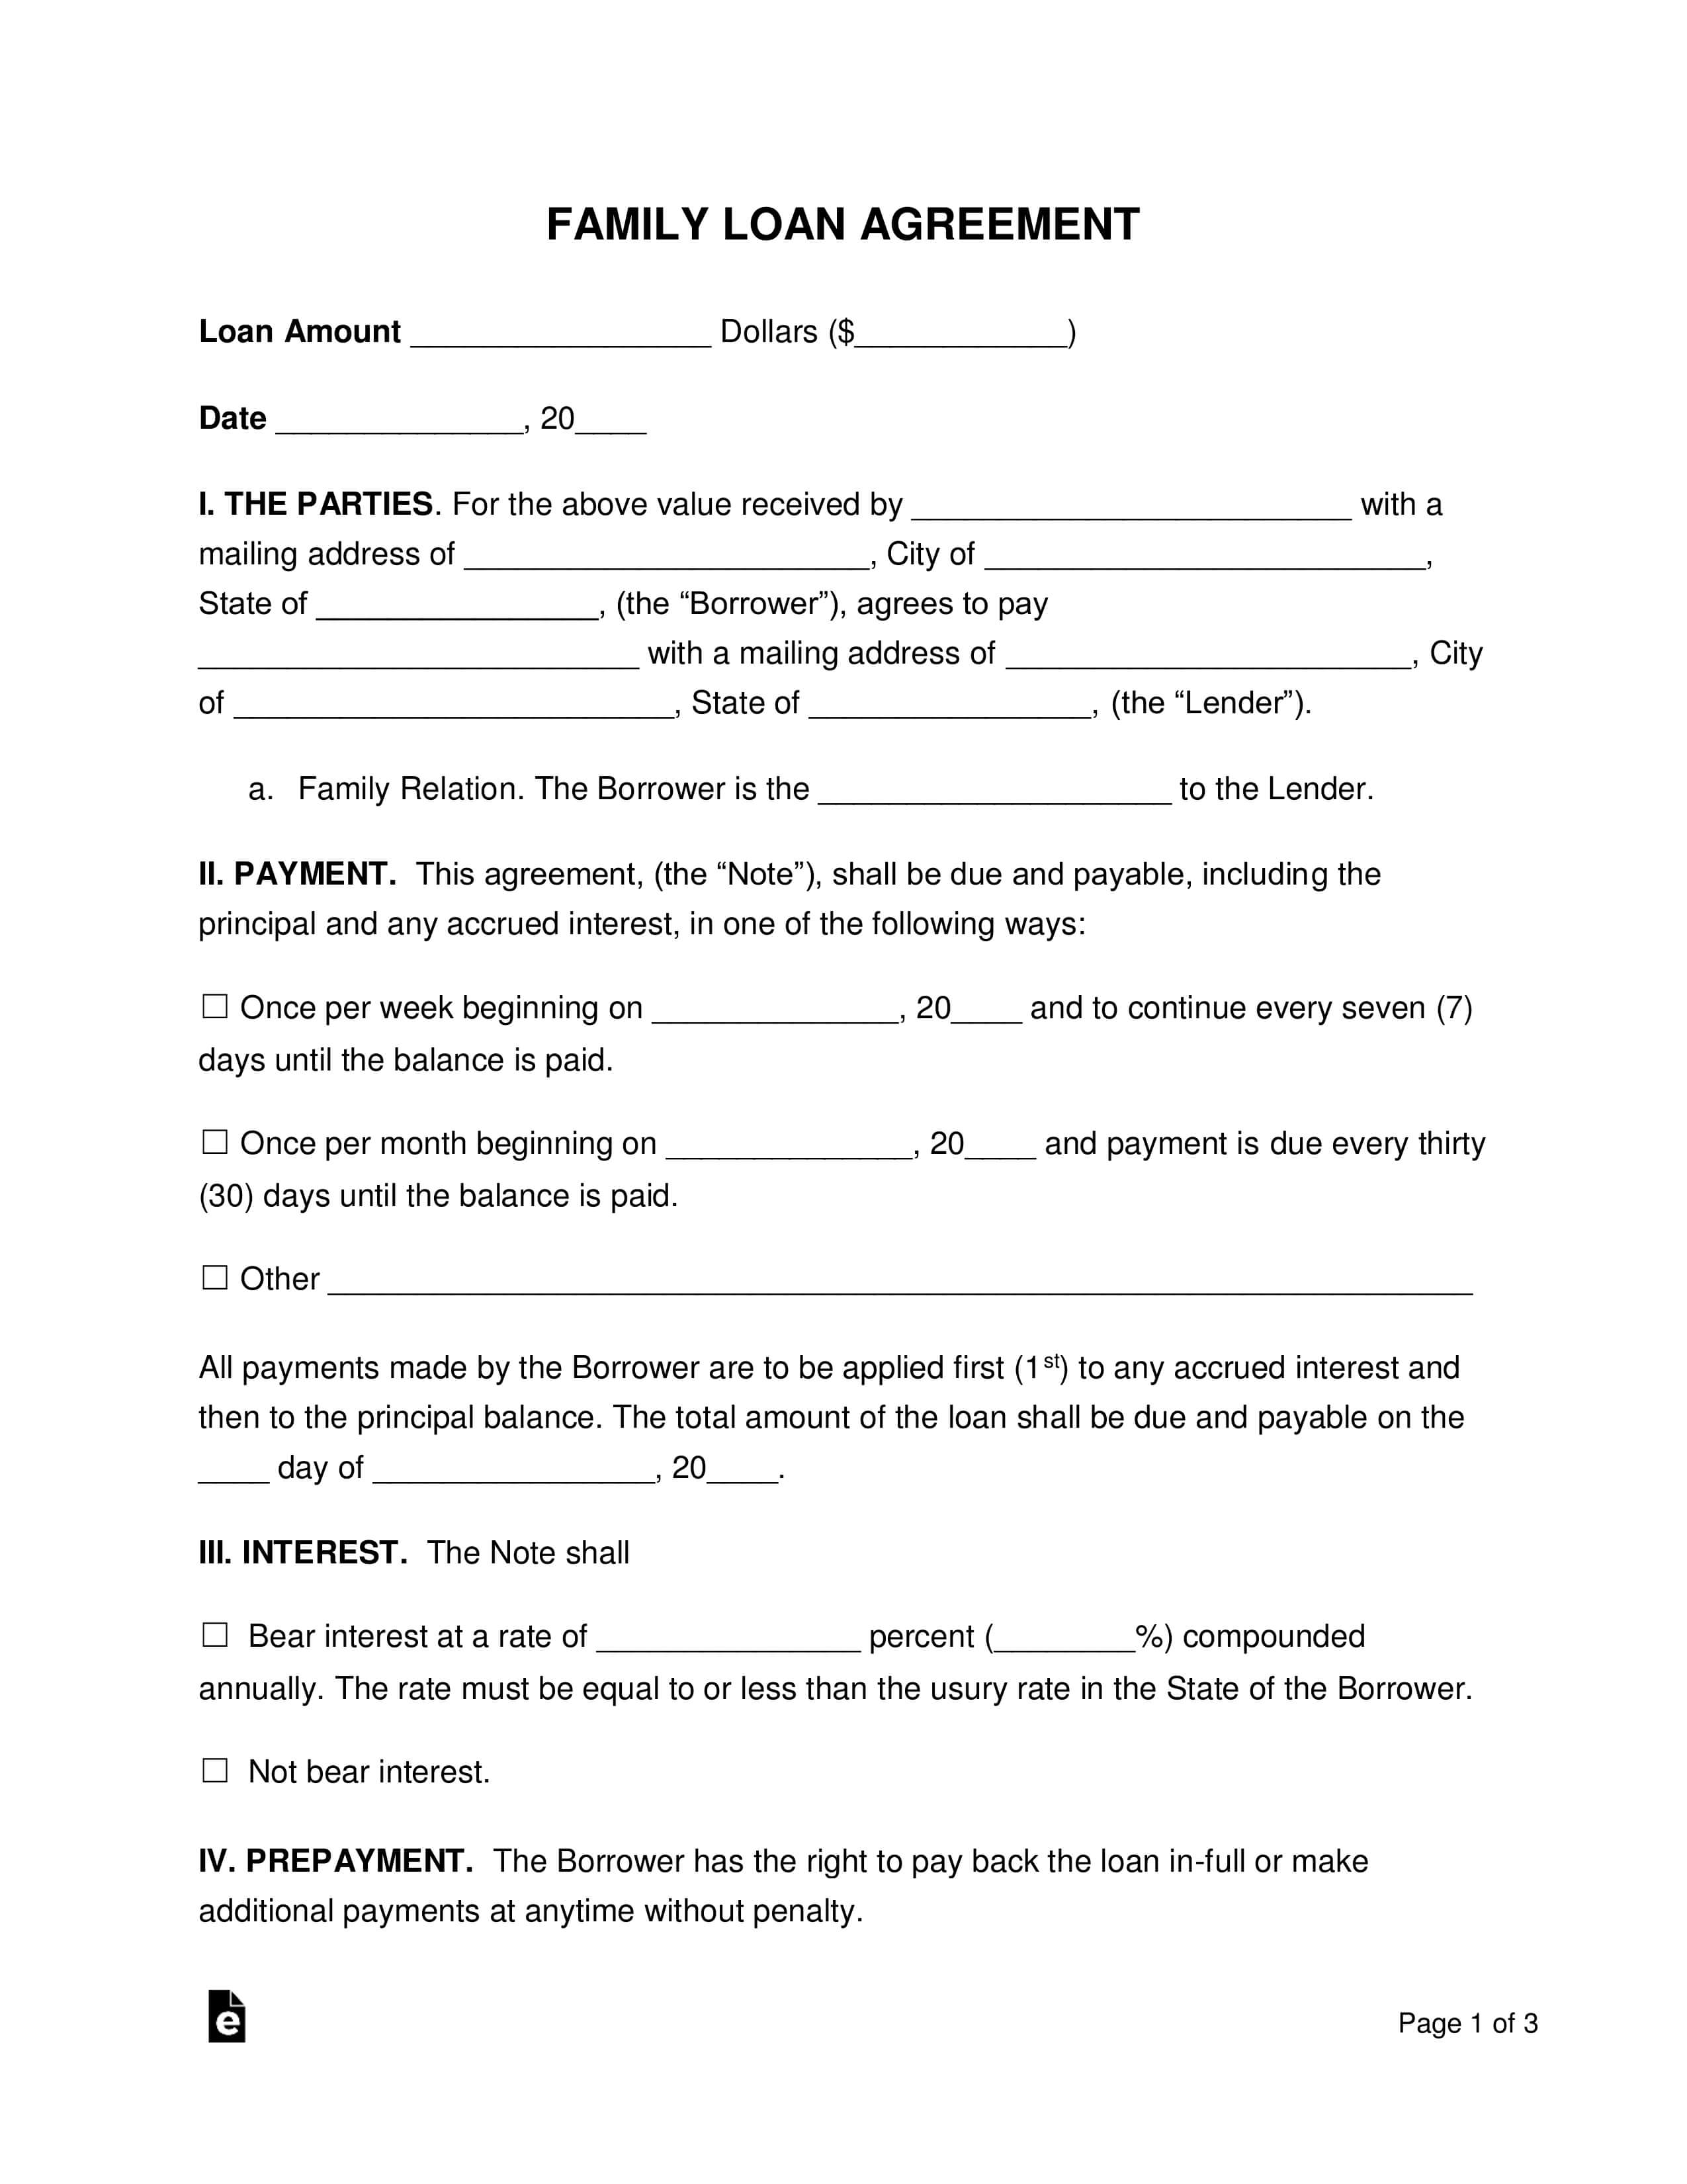 Free Family Loan Agreement Template – Pdf | Word | Eforms Inside Blank Loan Agreement Template